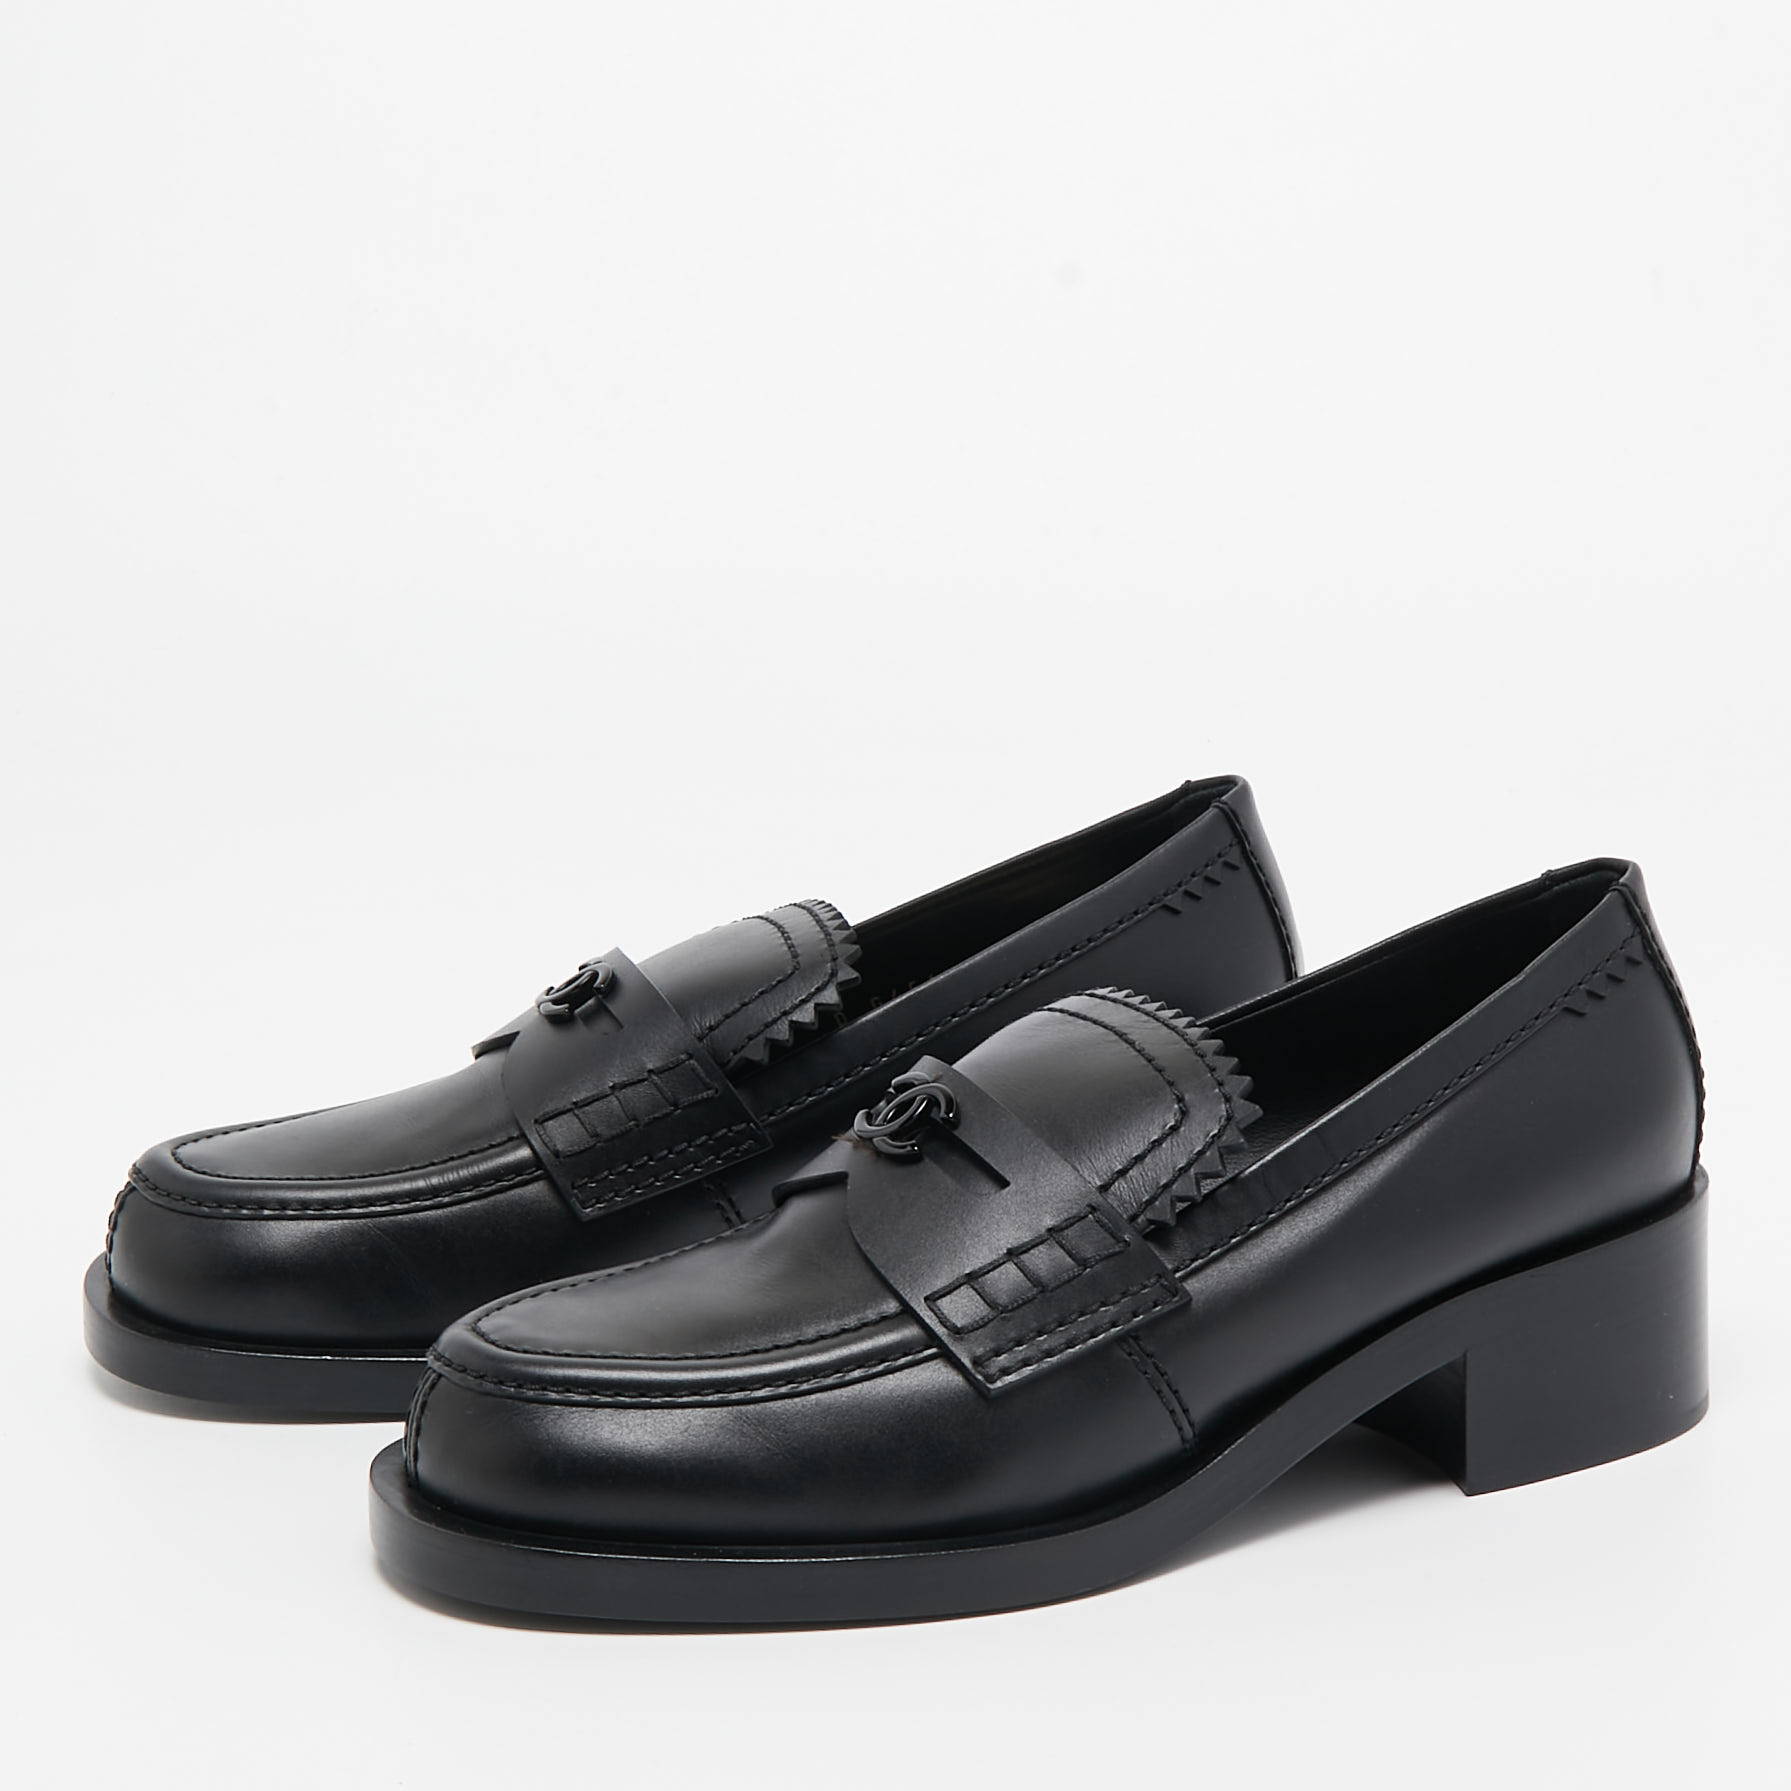 

Chanel Black Leather Slip On Loafers Size